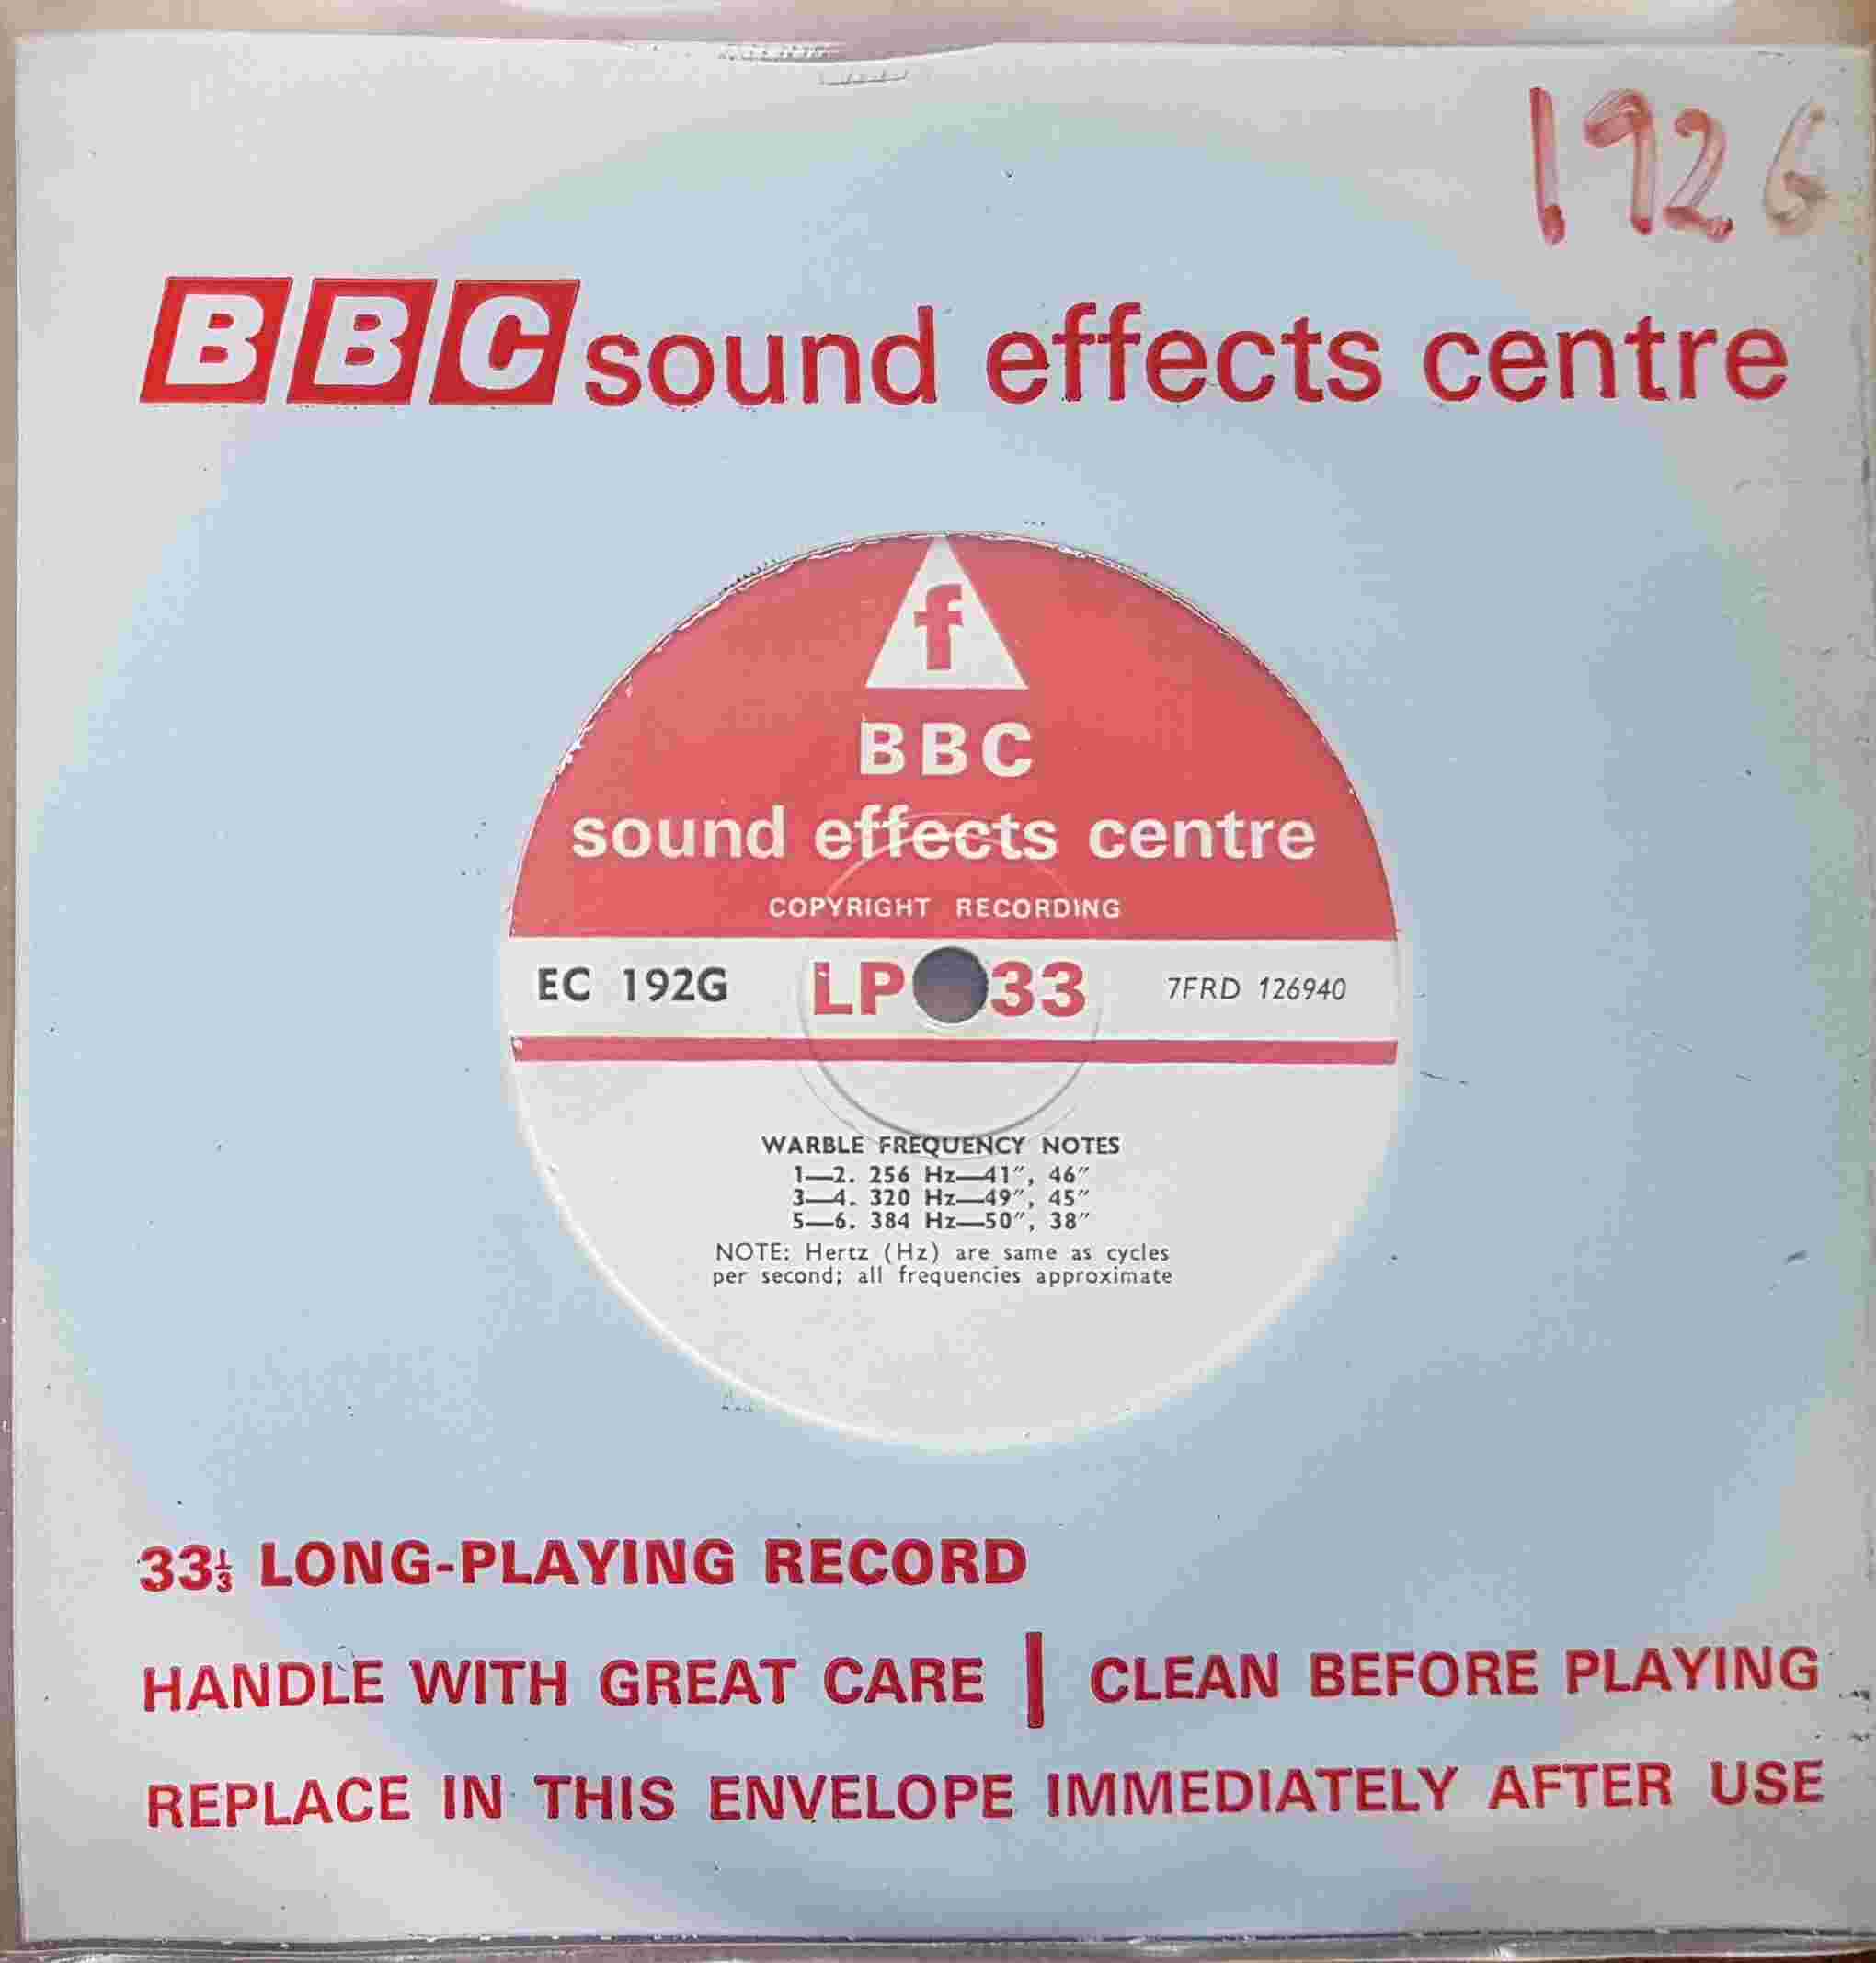 Picture of EC 192G Warble frequency notes by artist Not registered from the BBC singles - Records and Tapes library